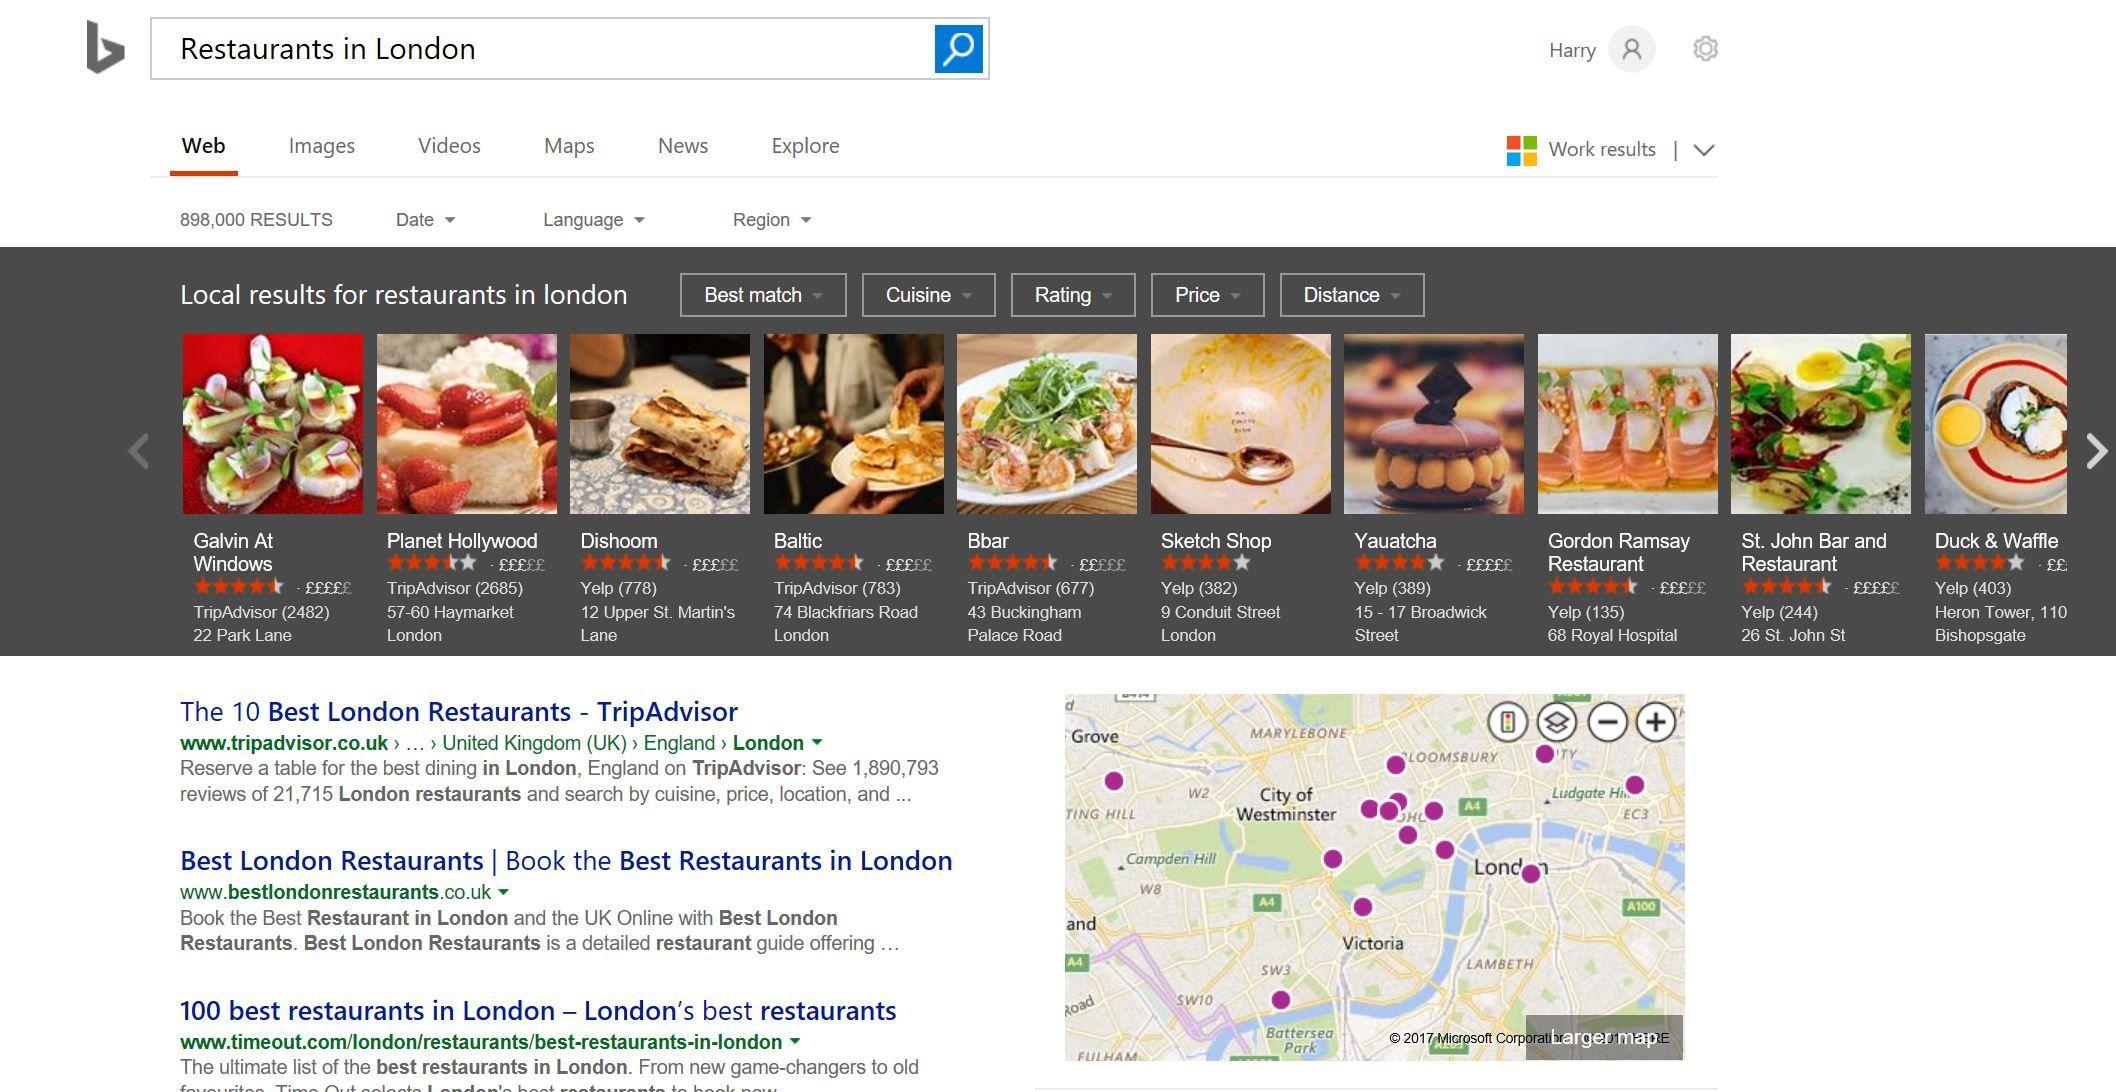 Bing Ultimate Logo - Bing now offers peak traffic times at restaurants for every day of ...